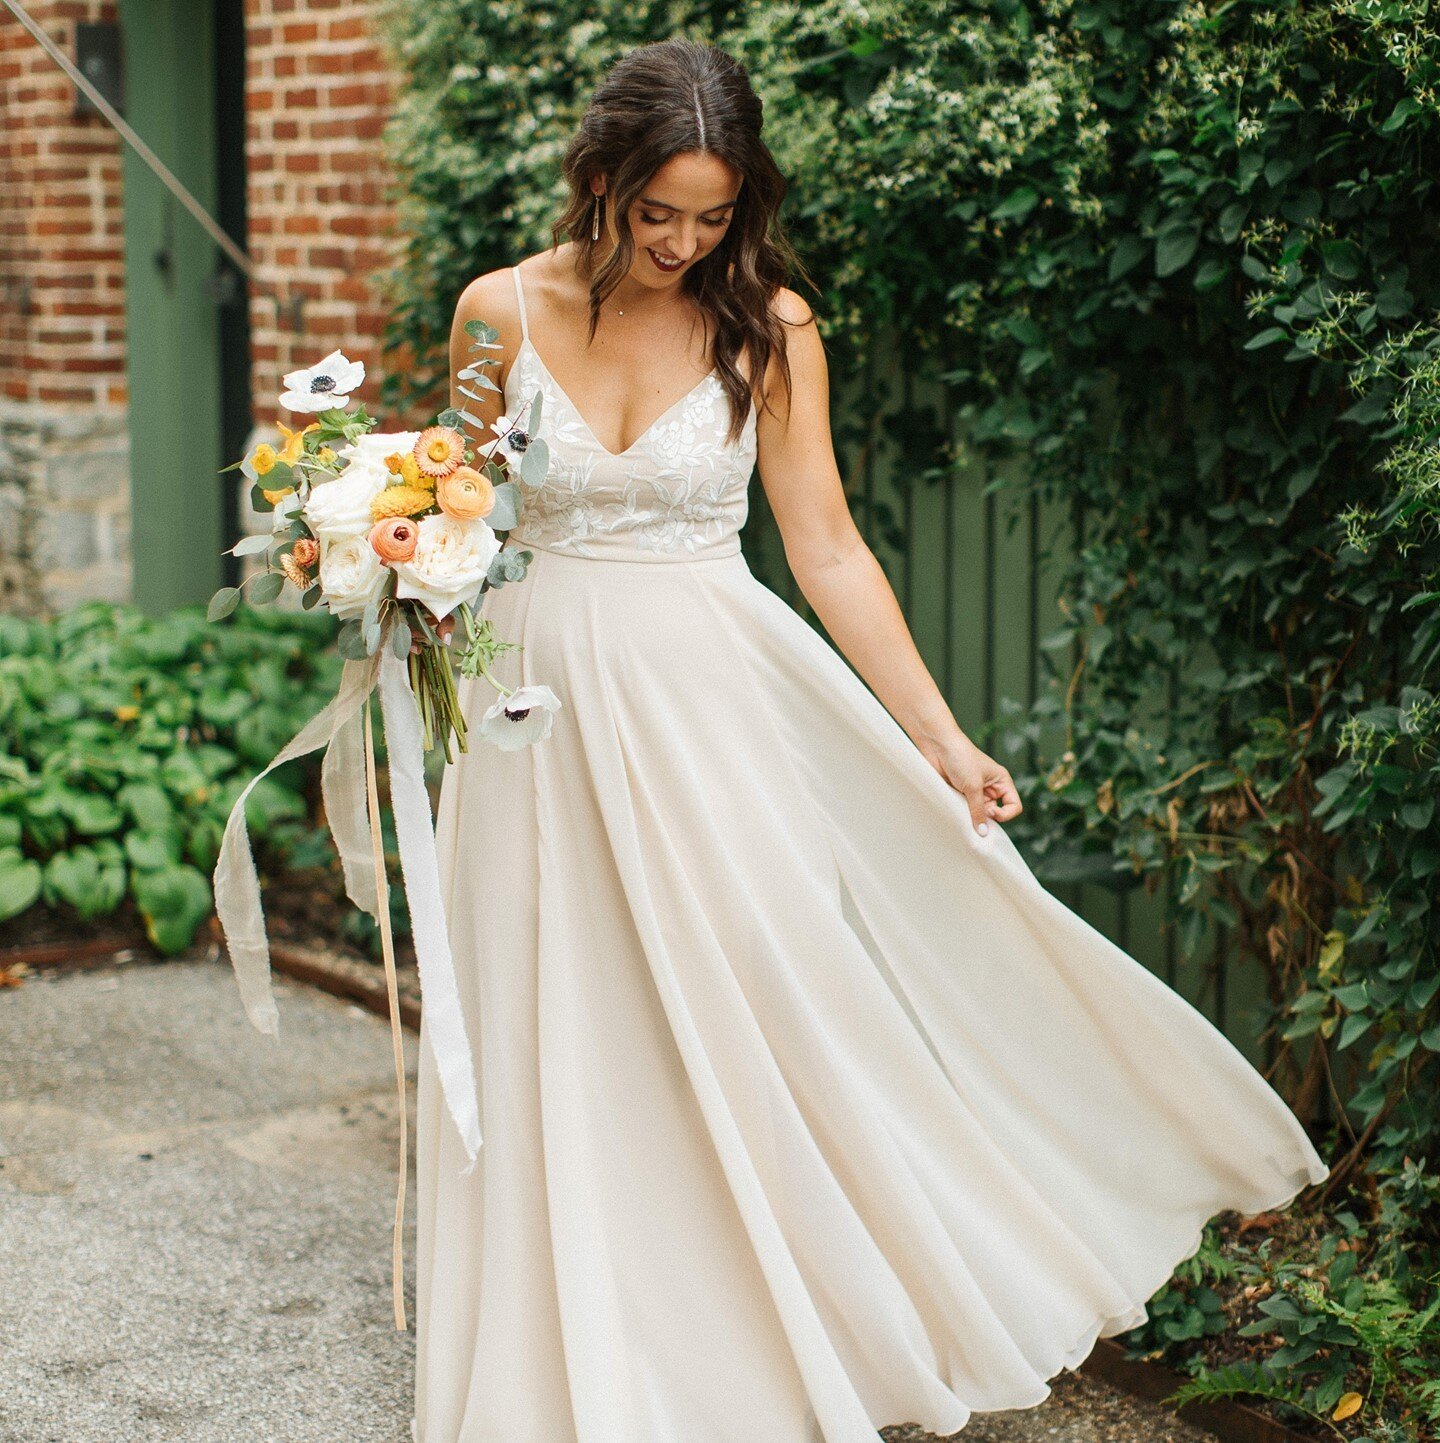 How good is a soft, twirly skirt?!! It's one of our favorites and we can make sure you get the perfect bustle to keep you twirling all over the dance floor.